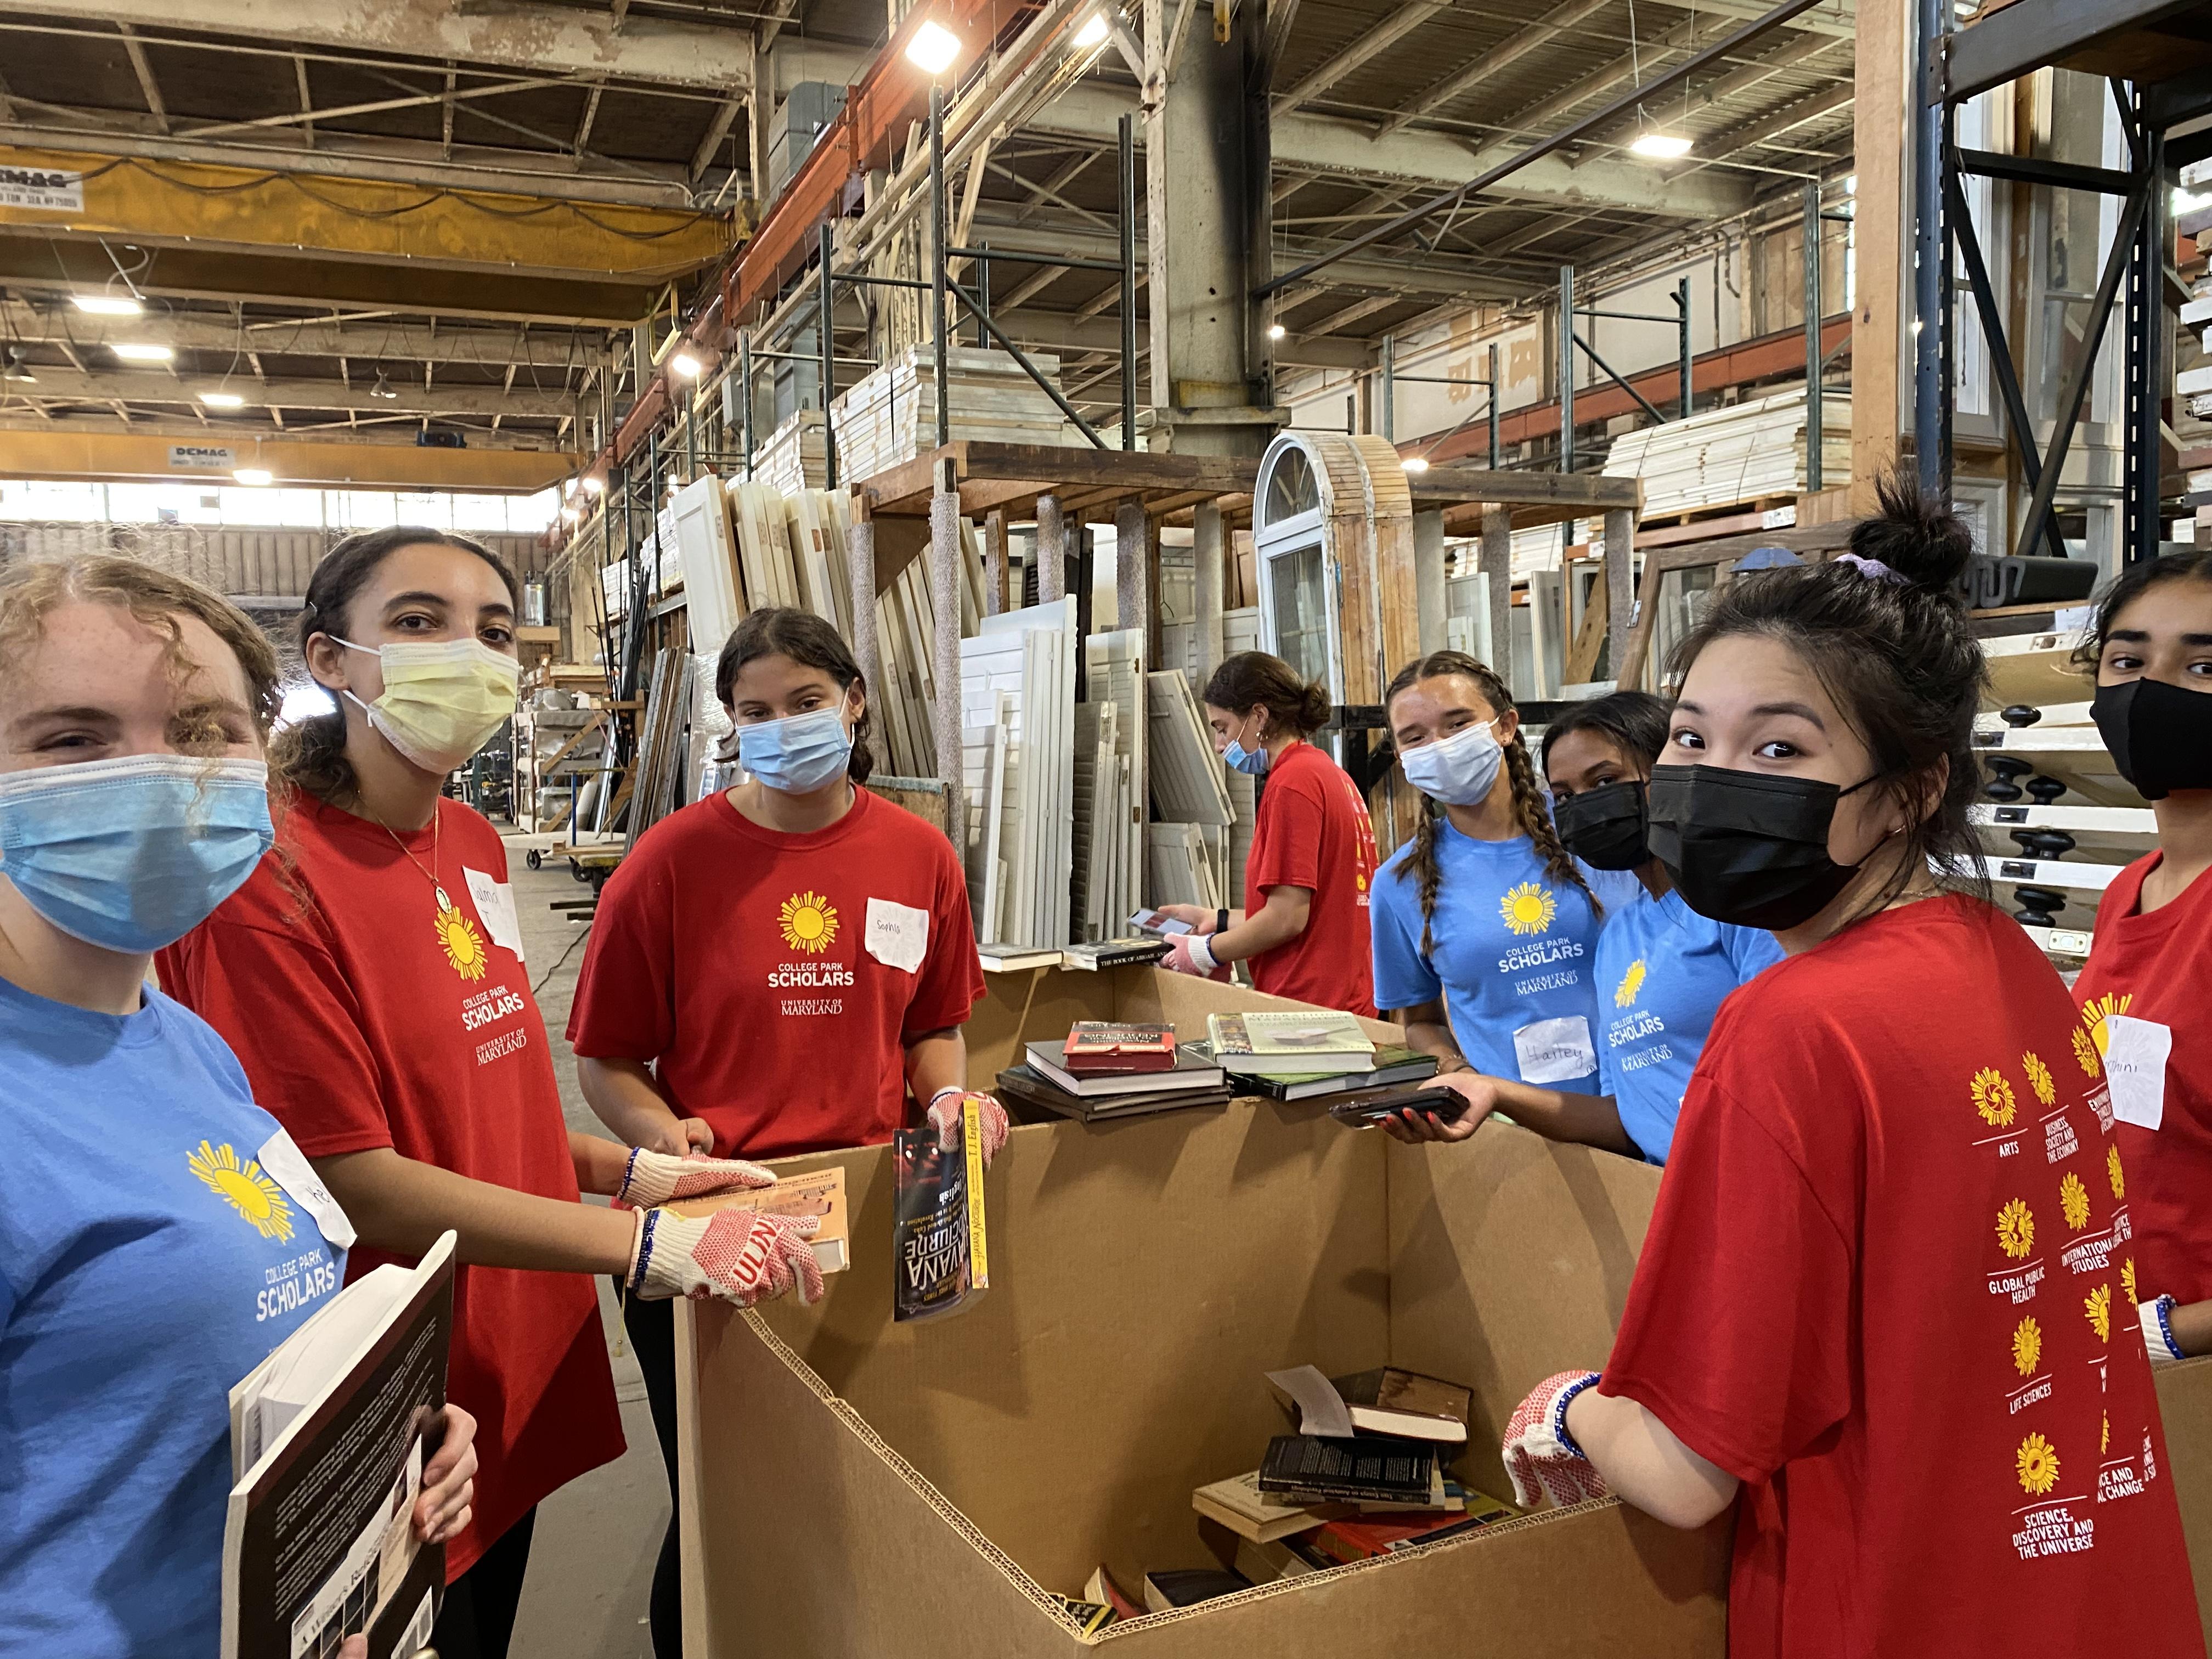 Seven global health scholars are standing around a large box in a Second Chance warehouse. They are wearing masks and looking at the camera.